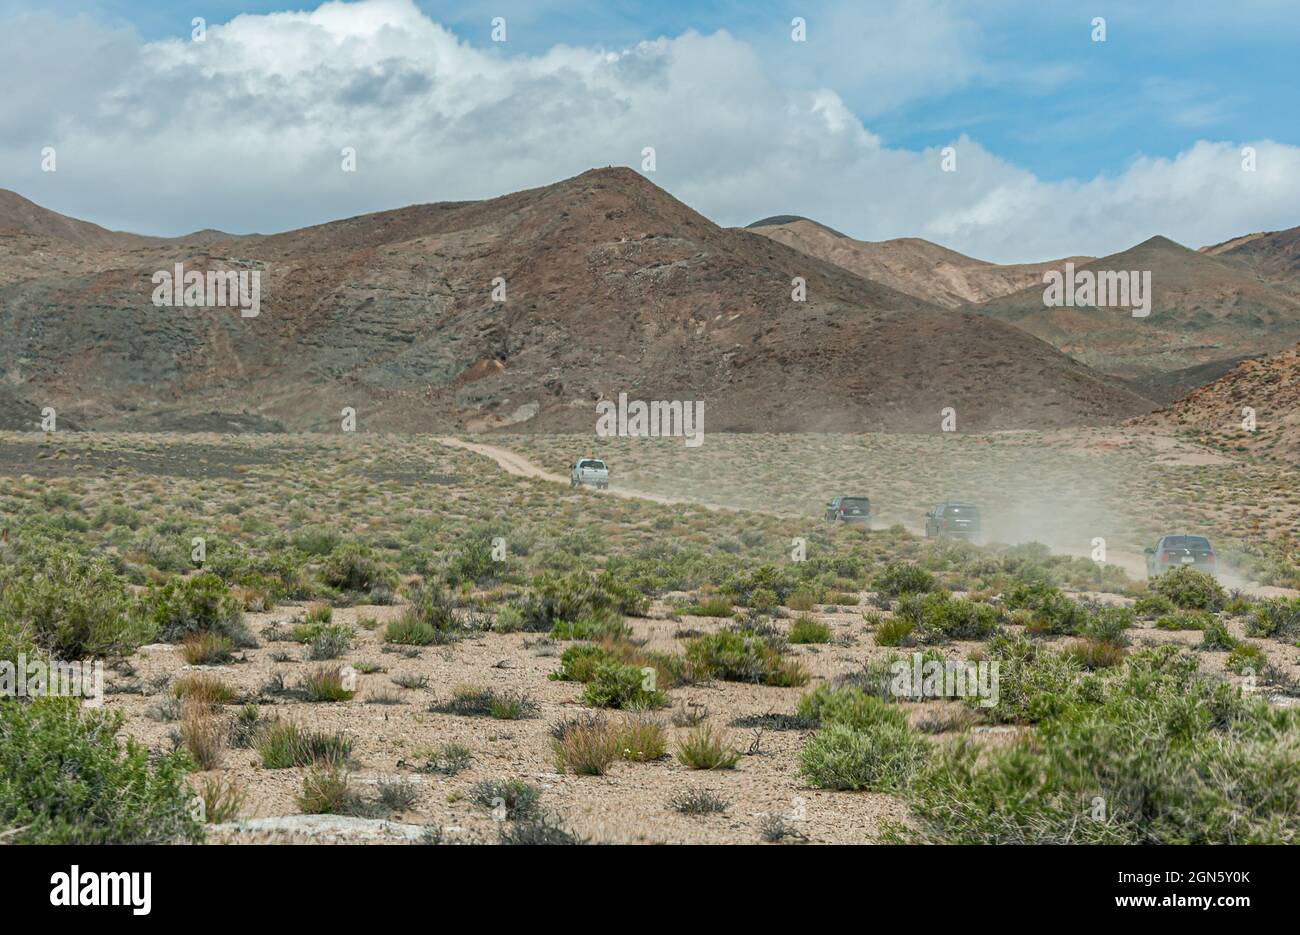 High Desert, Nevada, USA - May 17, 2011: I pickup truck and 3 SUVs drive on dirt road spewing dust in the air with mountain as backdrop under blue clo Stock Photo